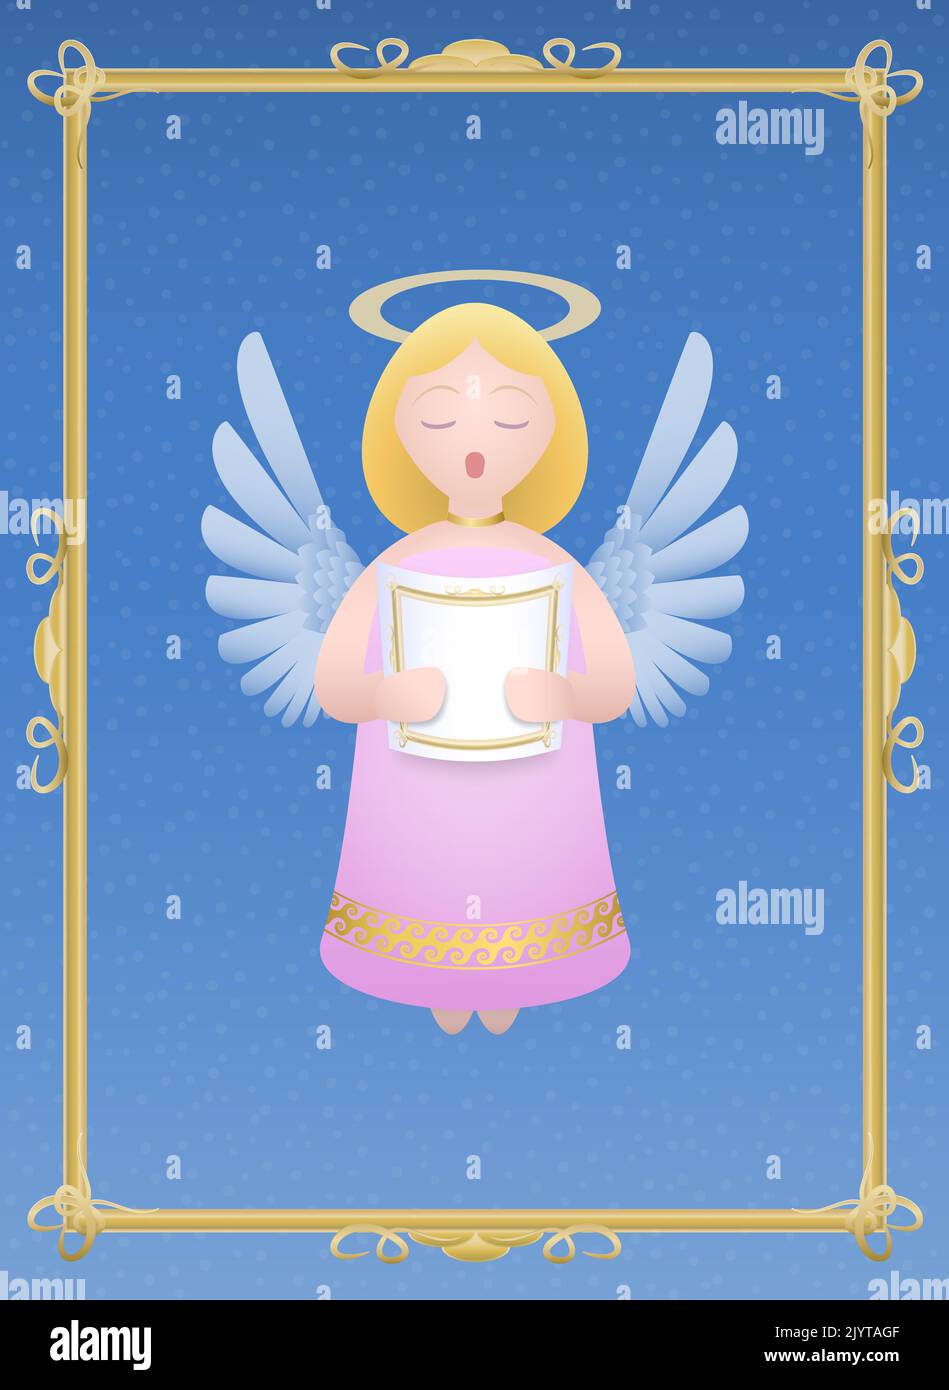 Singing christmas angel with gloriole, blond hair, pink dress, white wings and music sheet - illustration on snowfall background with golden frame. Stock Photo